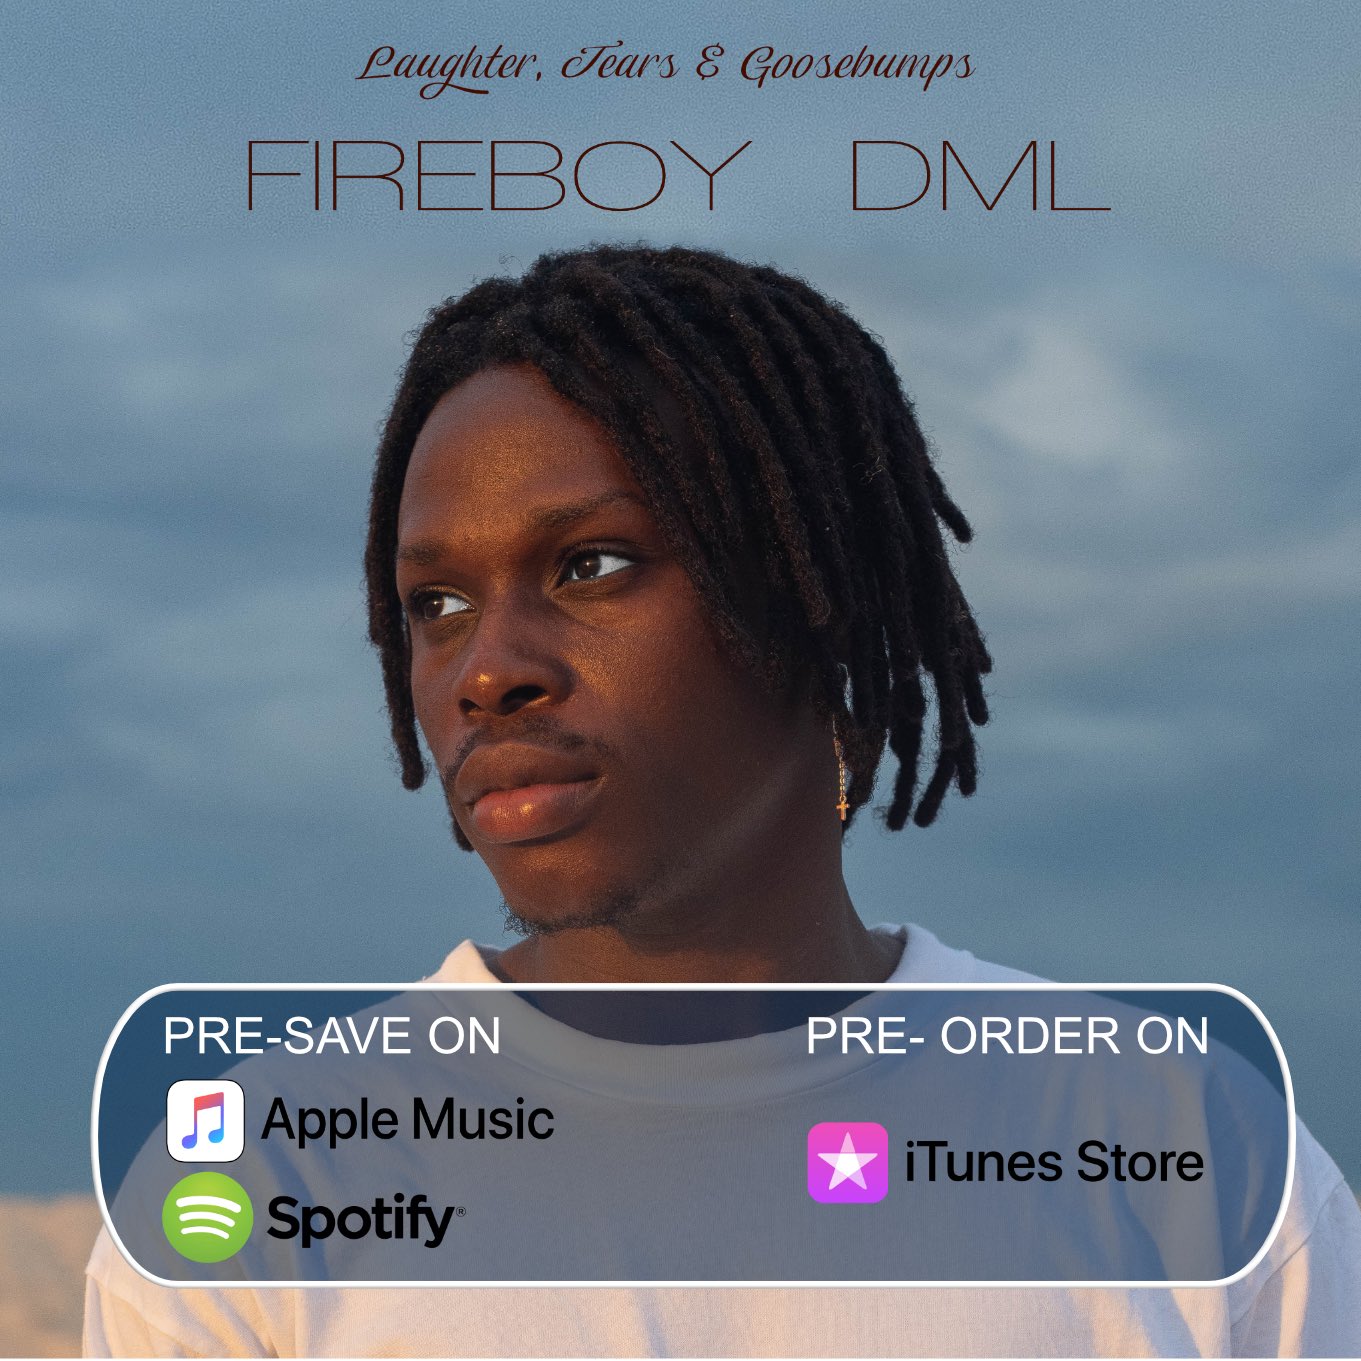 When is Fireboy’s debut album due to be released?